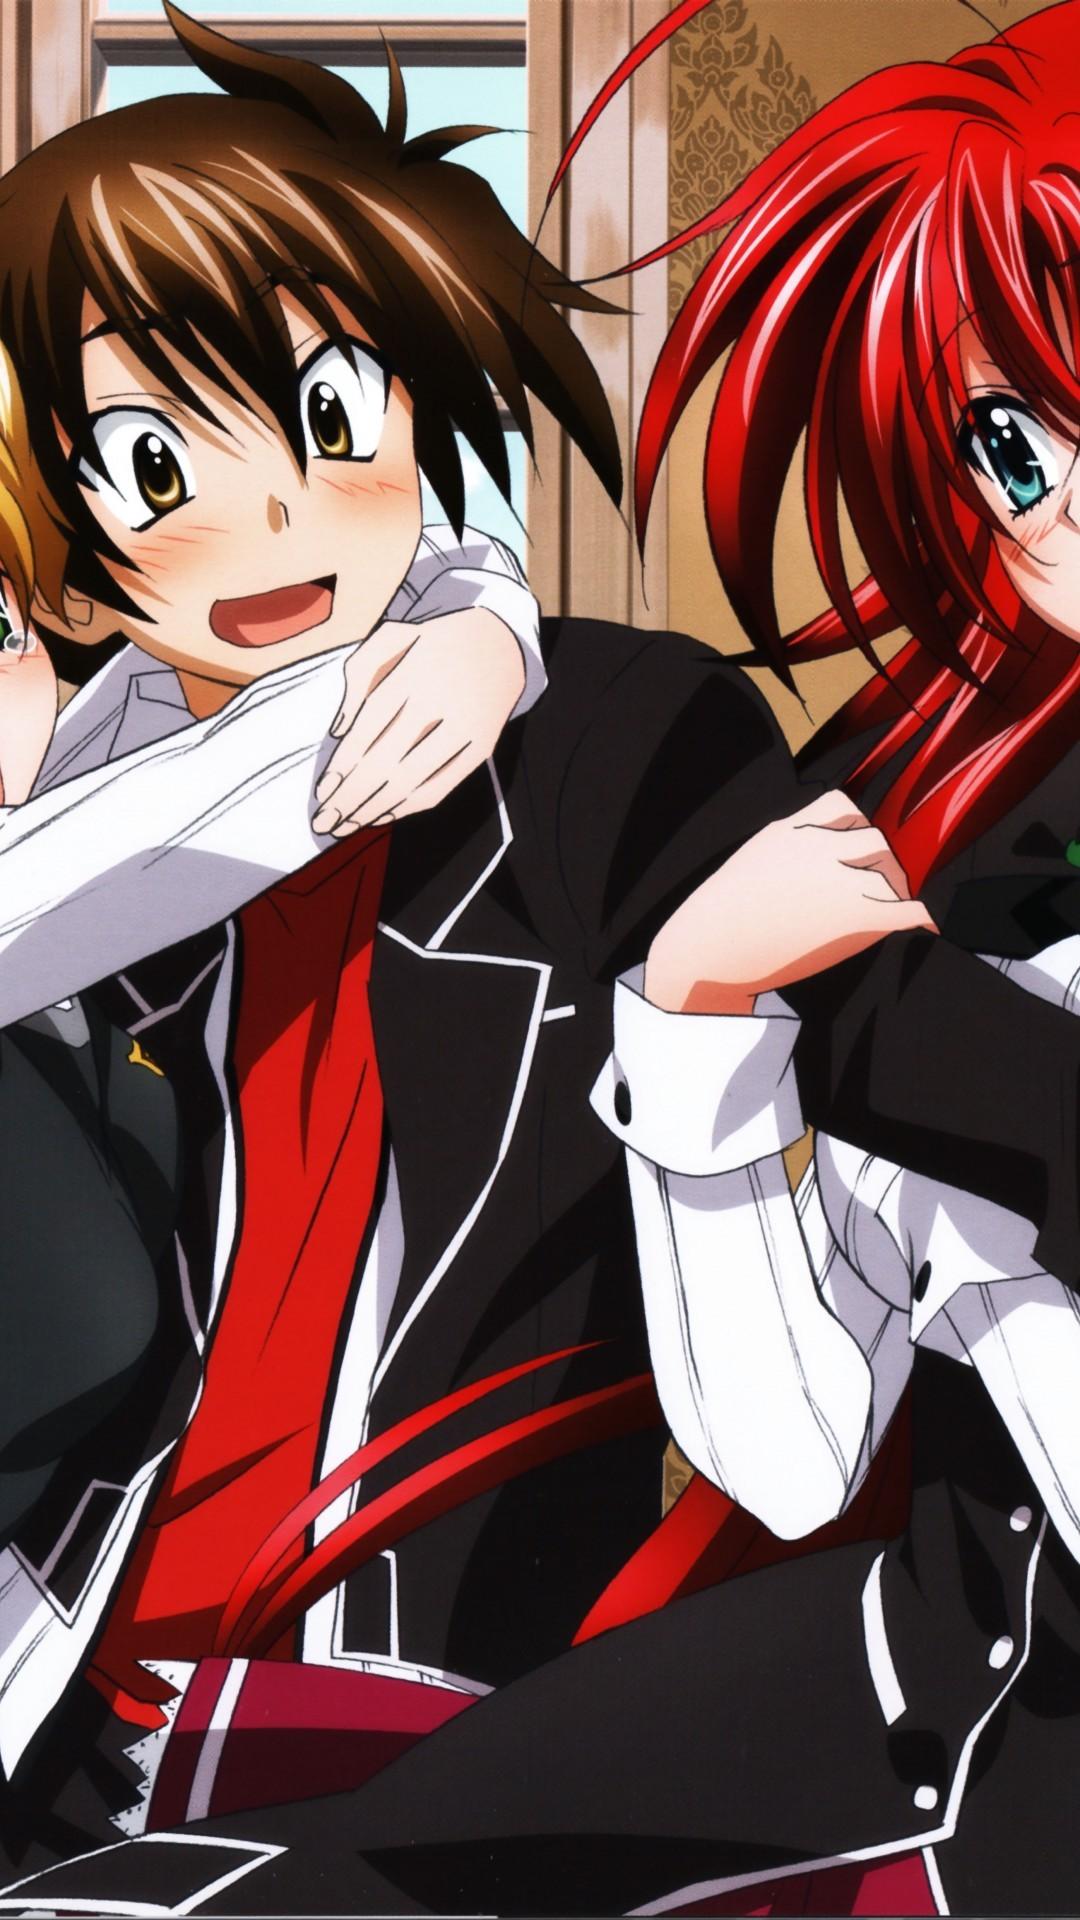 Download 1080x1920 High School Dxd, Rias Gremory, Asia Argento, Issei Hyoudou, Redhead Wallpaper for iPhone iPhone 7 Plus, iPhone 6+, Sony Xperia Z, HTC One